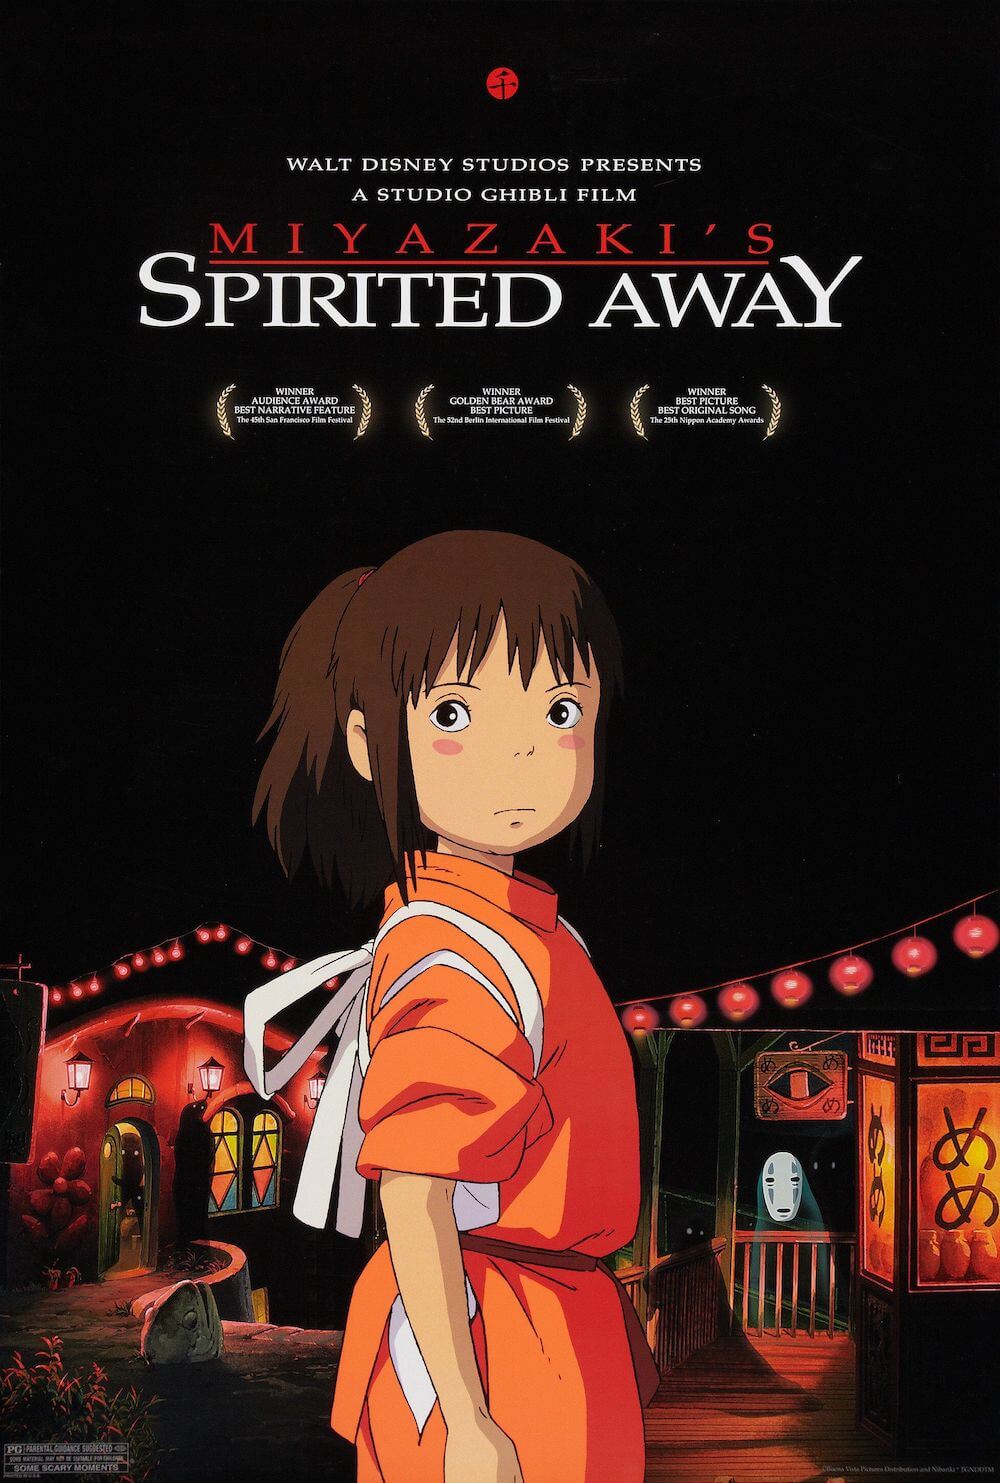 Watch Spirited Away, one of the best Studio Ghibli movies for 9+ year olds.